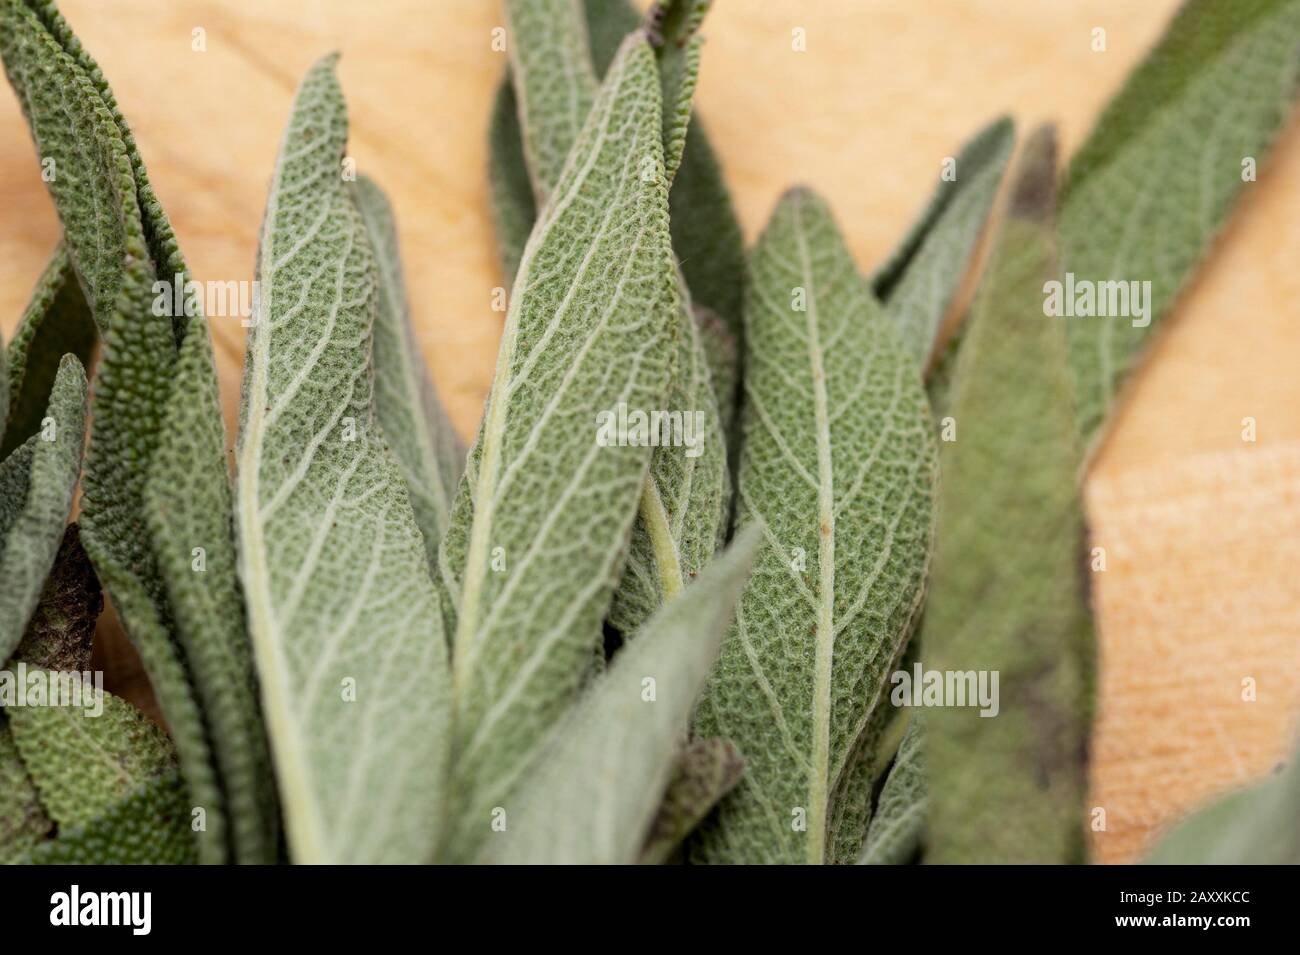 Closeup of fresh sage leaves used as an aromatic herbal seasoning and flavouring in cooking Stock Photo